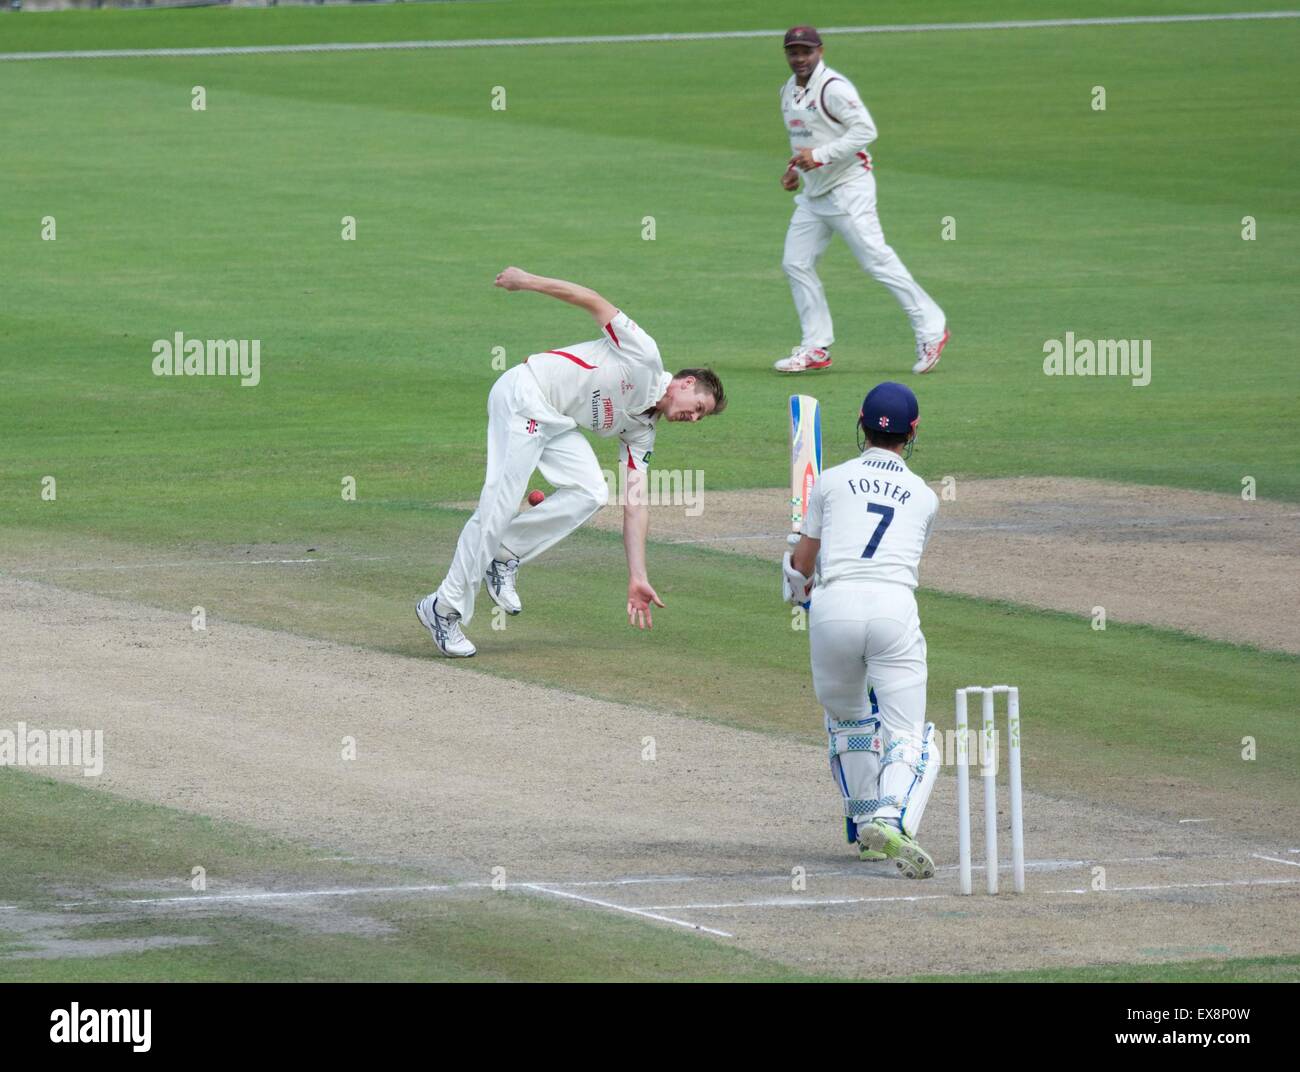 Manchester UK 9th July 2015  James Faulkner tries to field the ball off his own bowling on the fourth day of the County Championship match between Lancashire and Essex at Emirates Old Trafford with Lancashire pressing for an unlikely win in a rain-affected match. Faulkner finished with five wickets. Cricket Lancashire v Essex Manchester, UK Credit:  John Fryer/Alamy Live News Stock Photo